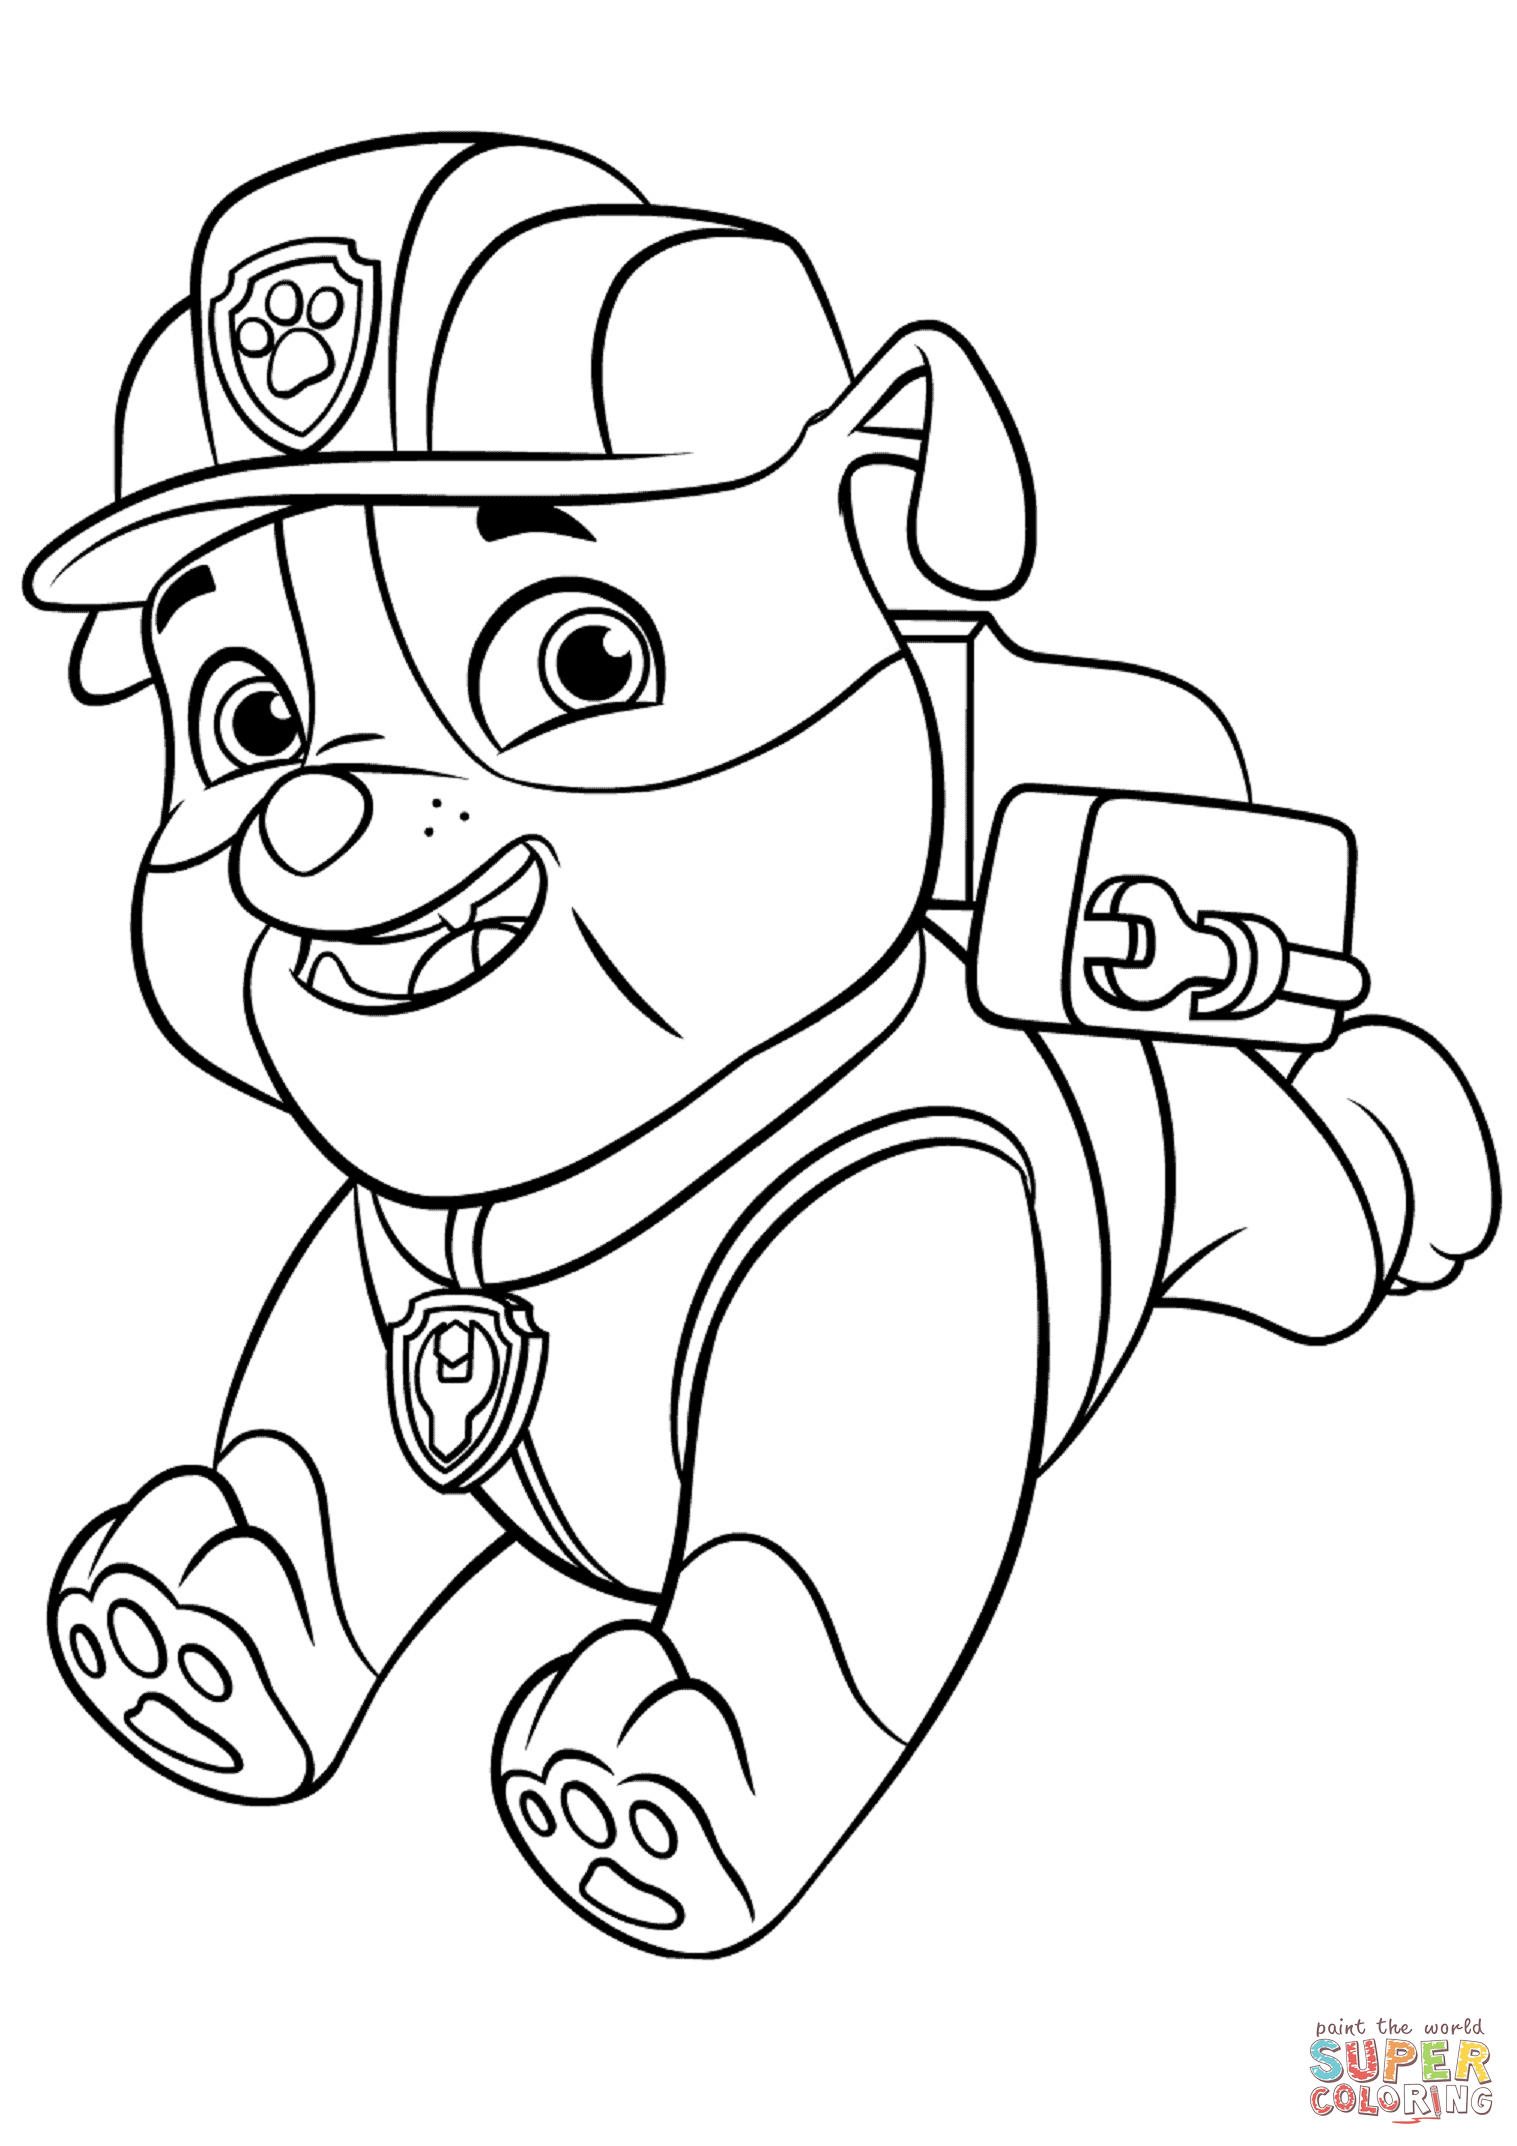 Paw Patrol Coloring Pages FREE Printable 78